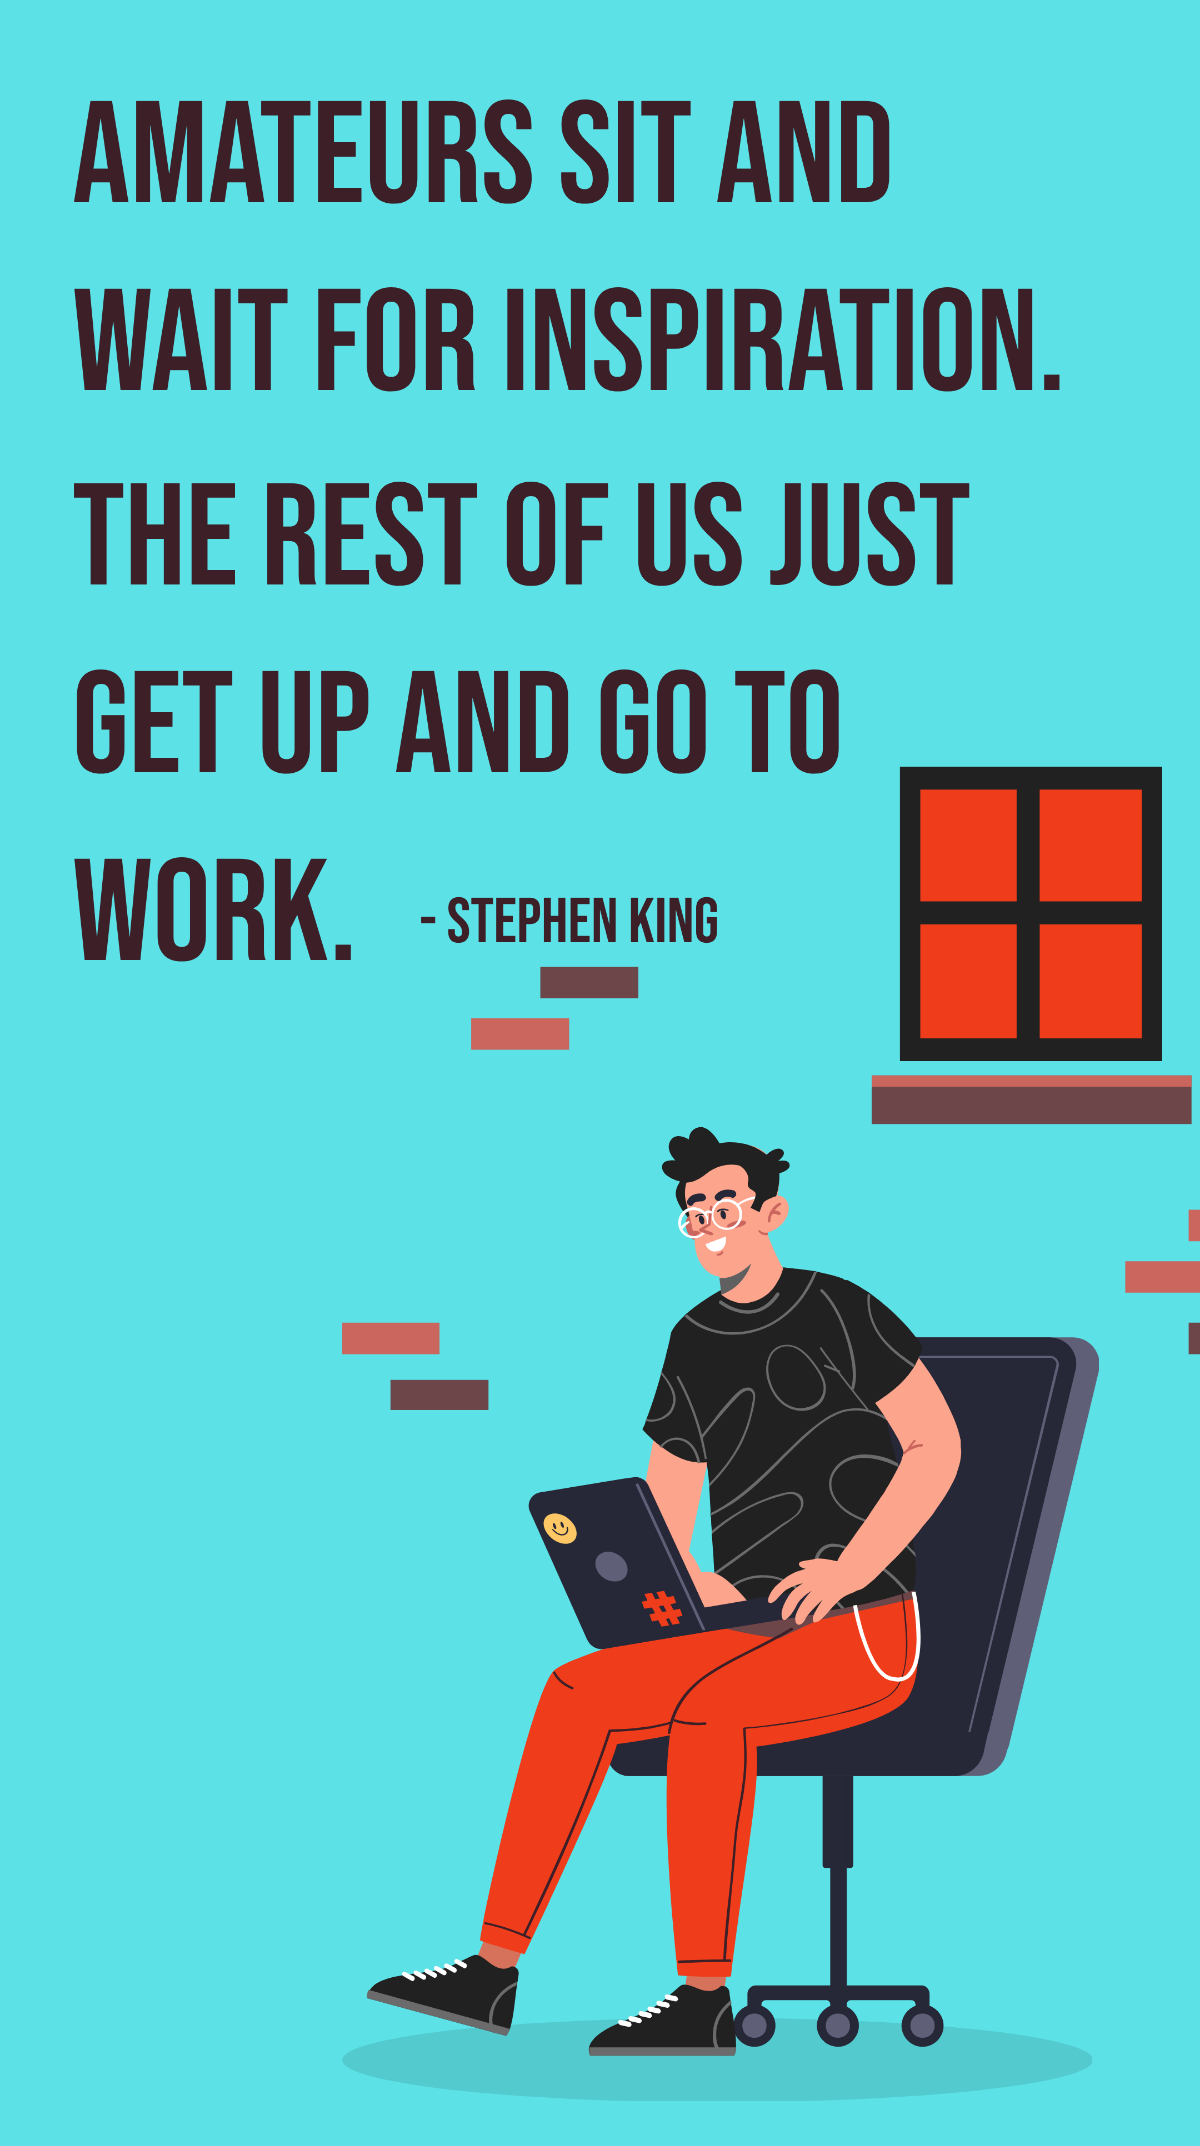 Stephen King - Amateurs sit and wait for inspiration. The rest of us just get up and go to work. Template